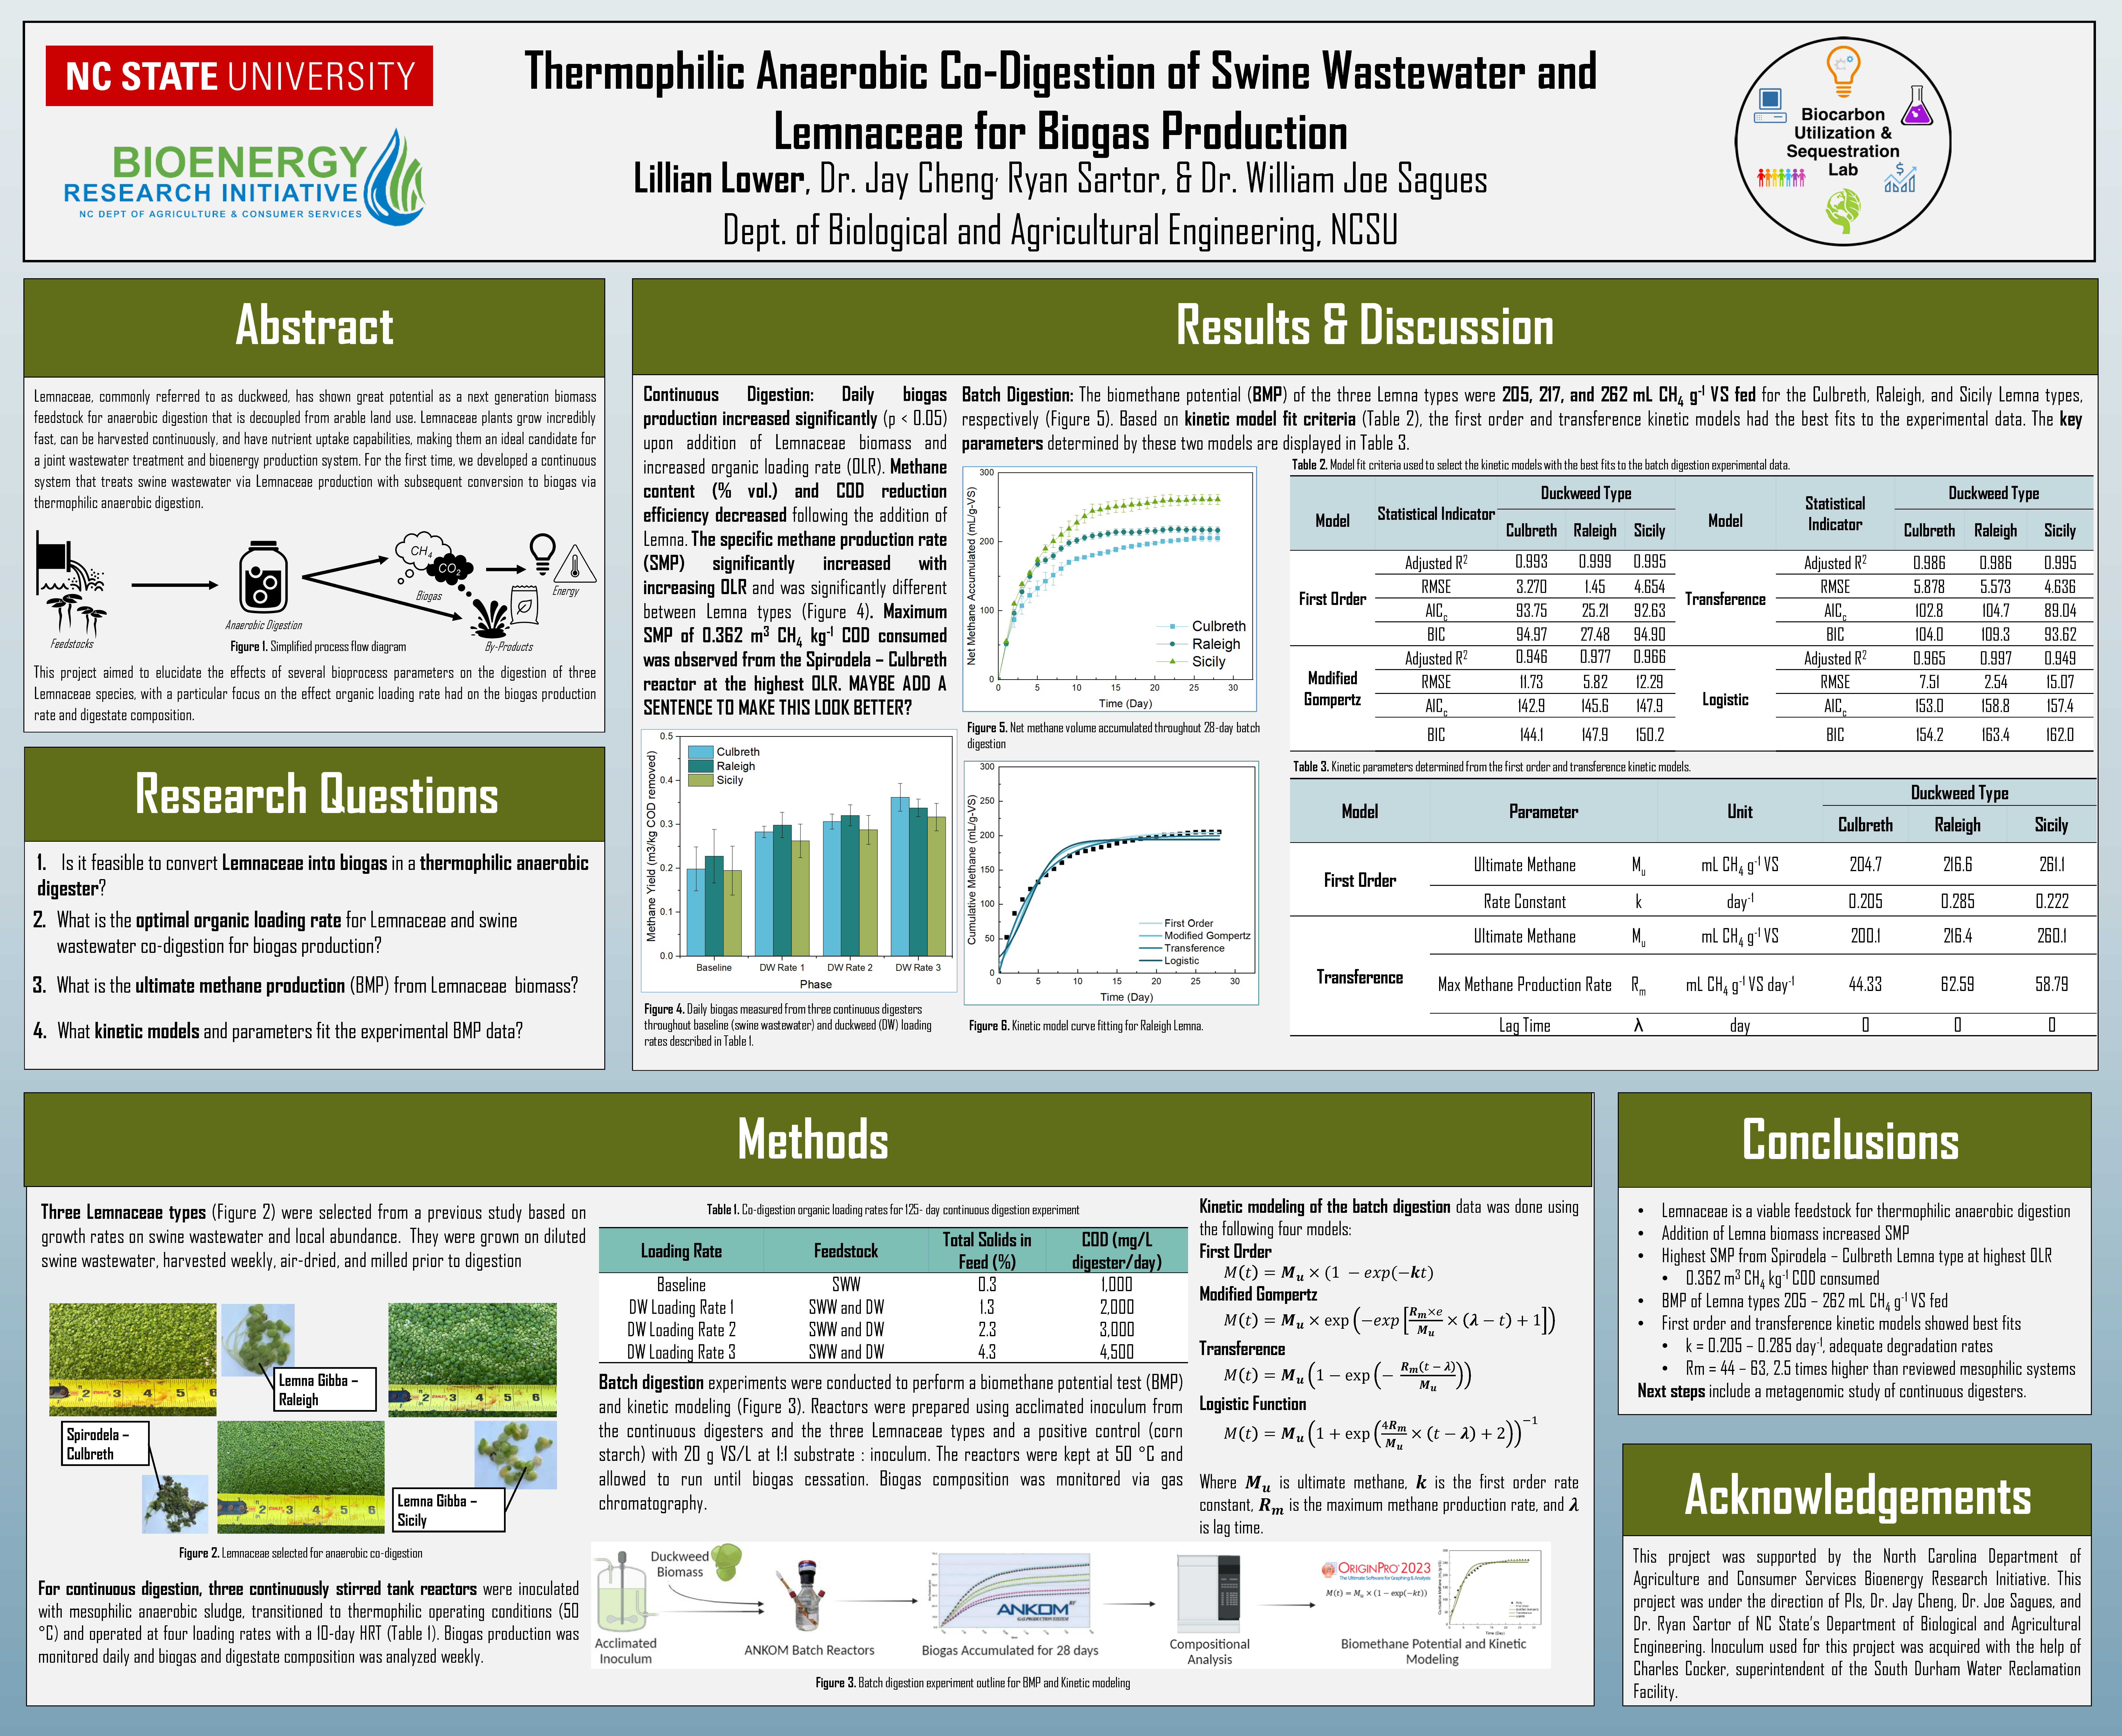 image of Lillian Lower's poster, "Thermophilic Anaerobic Co-Digestion of Swine Wastewater and Lemnaceae for Biogas Production"